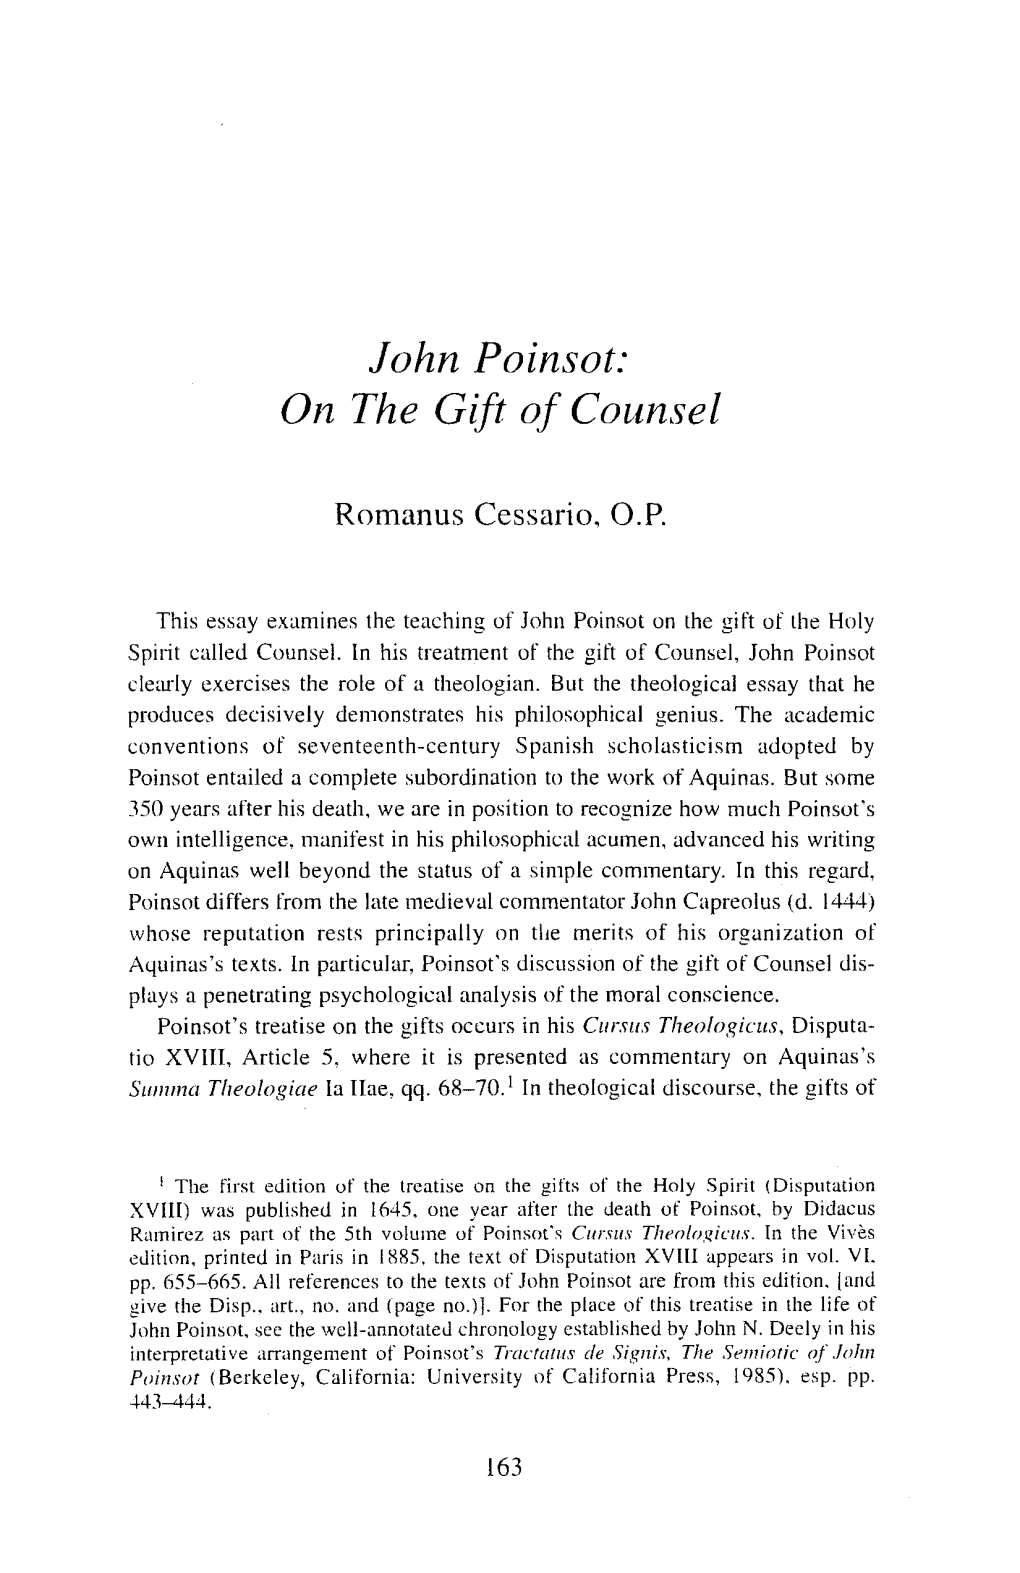 13. John Poinsot: on the Gift of Counsel